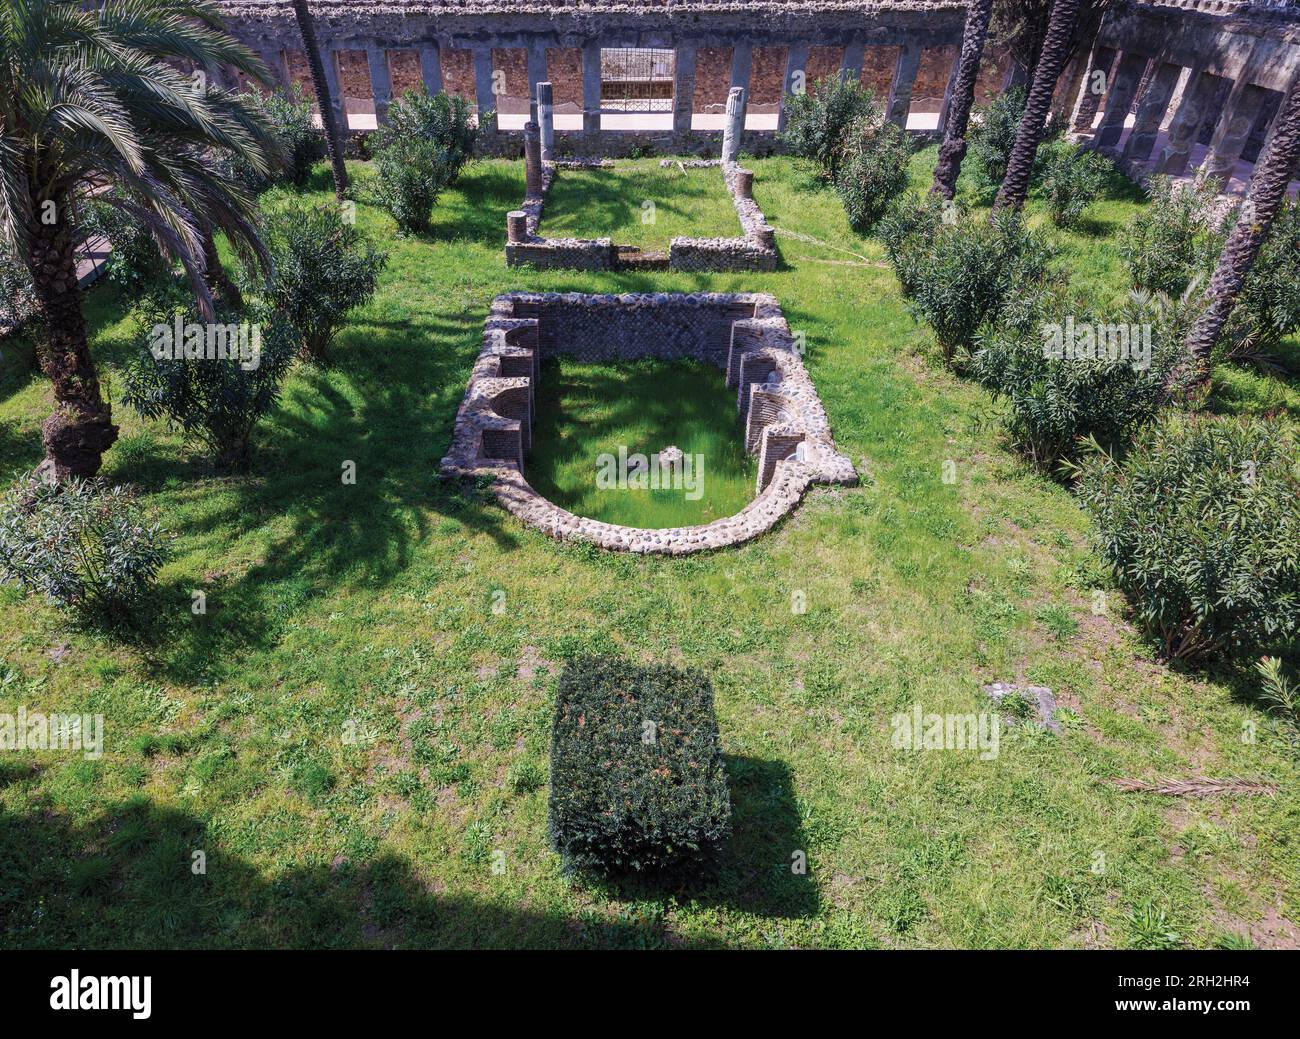 Pompeii Archaeological Site, Campania, Italy.  The gardens of  Villa di Diomede, the Villa of Diomedes.  Pompeii, Herculaneum, and Torre Annunziata ar Stock Photo